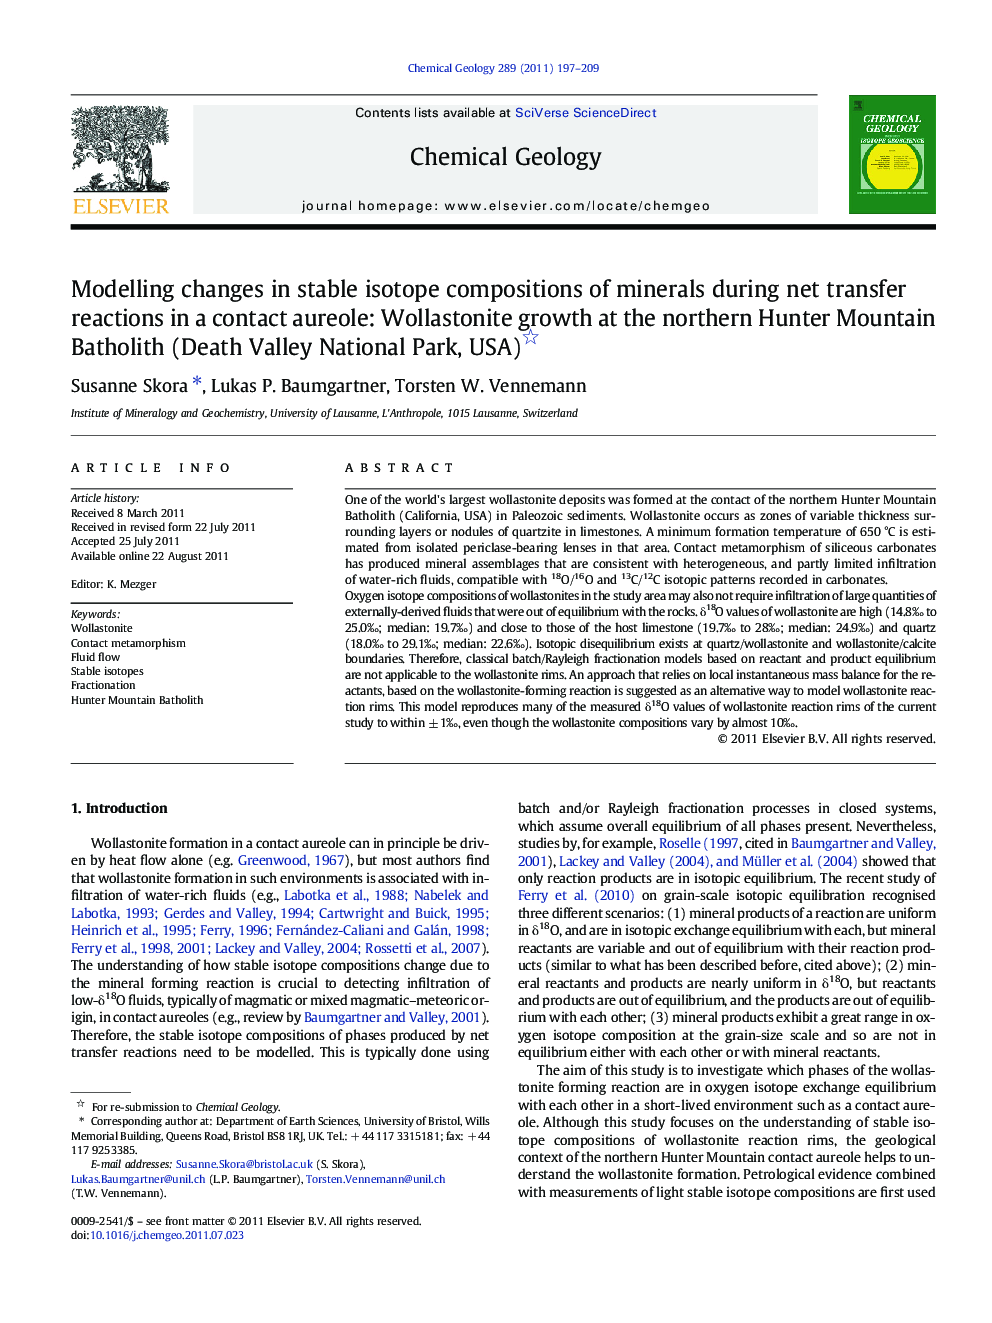 Modelling changes in stable isotope compositions of minerals during net transfer reactions in a contact aureole: Wollastonite growth at the northern Hunter Mountain Batholith (Death Valley National Park, USA)